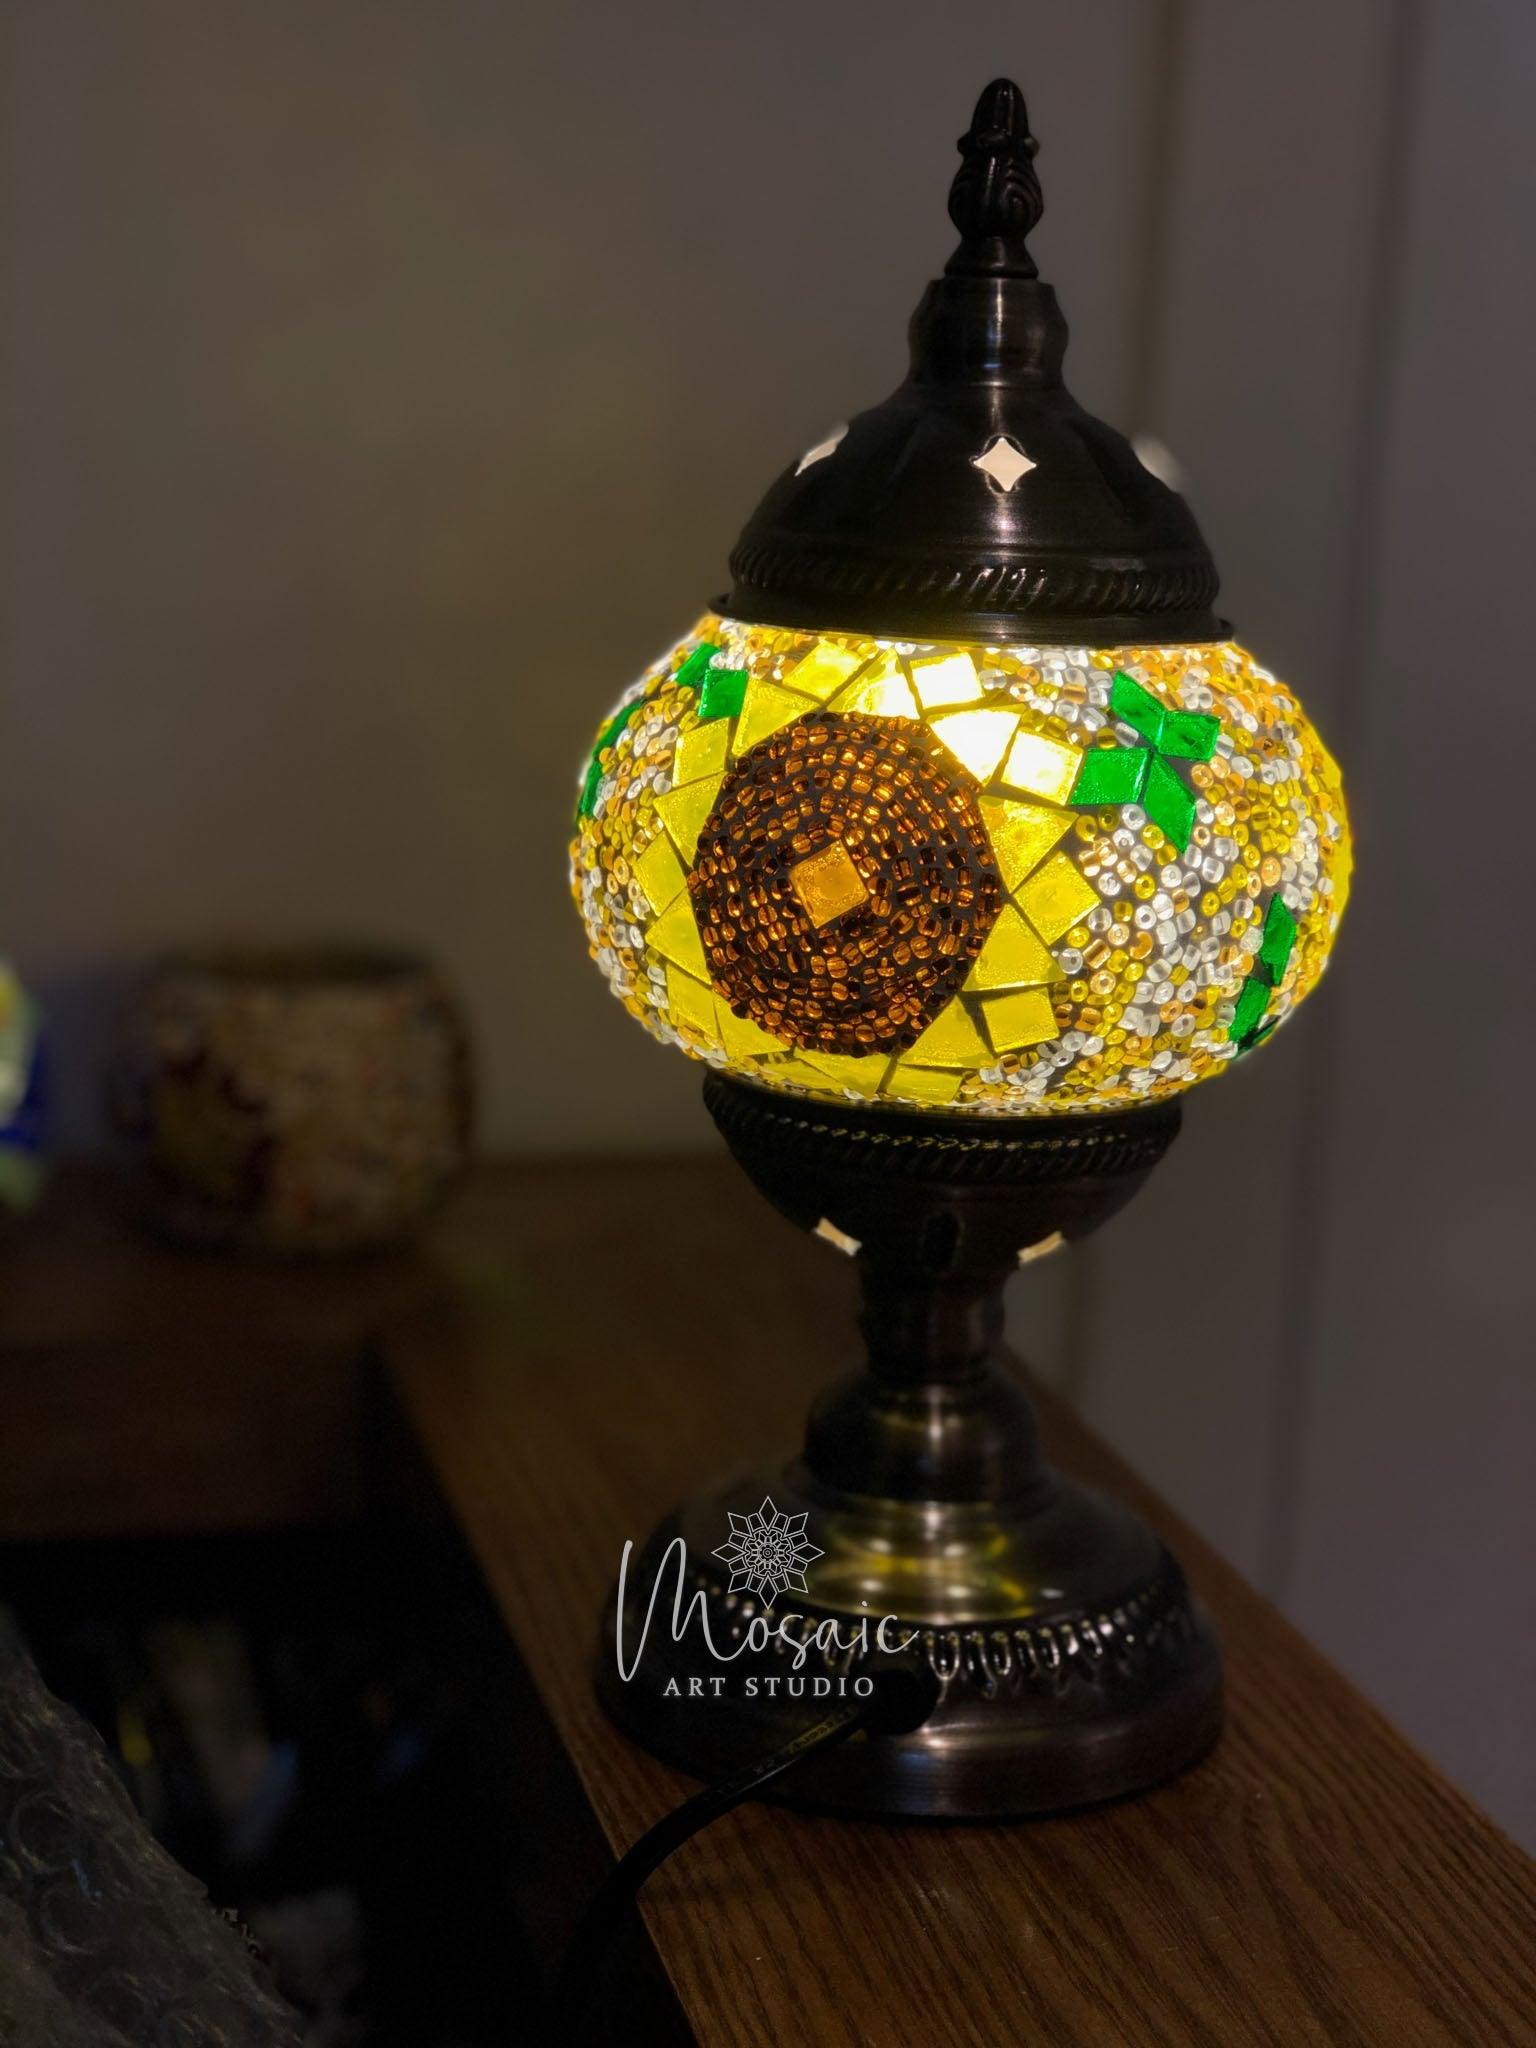 The Art of the Turkish Mosaic Lamp with Special Flowers Design - Mosaic Art Studio US